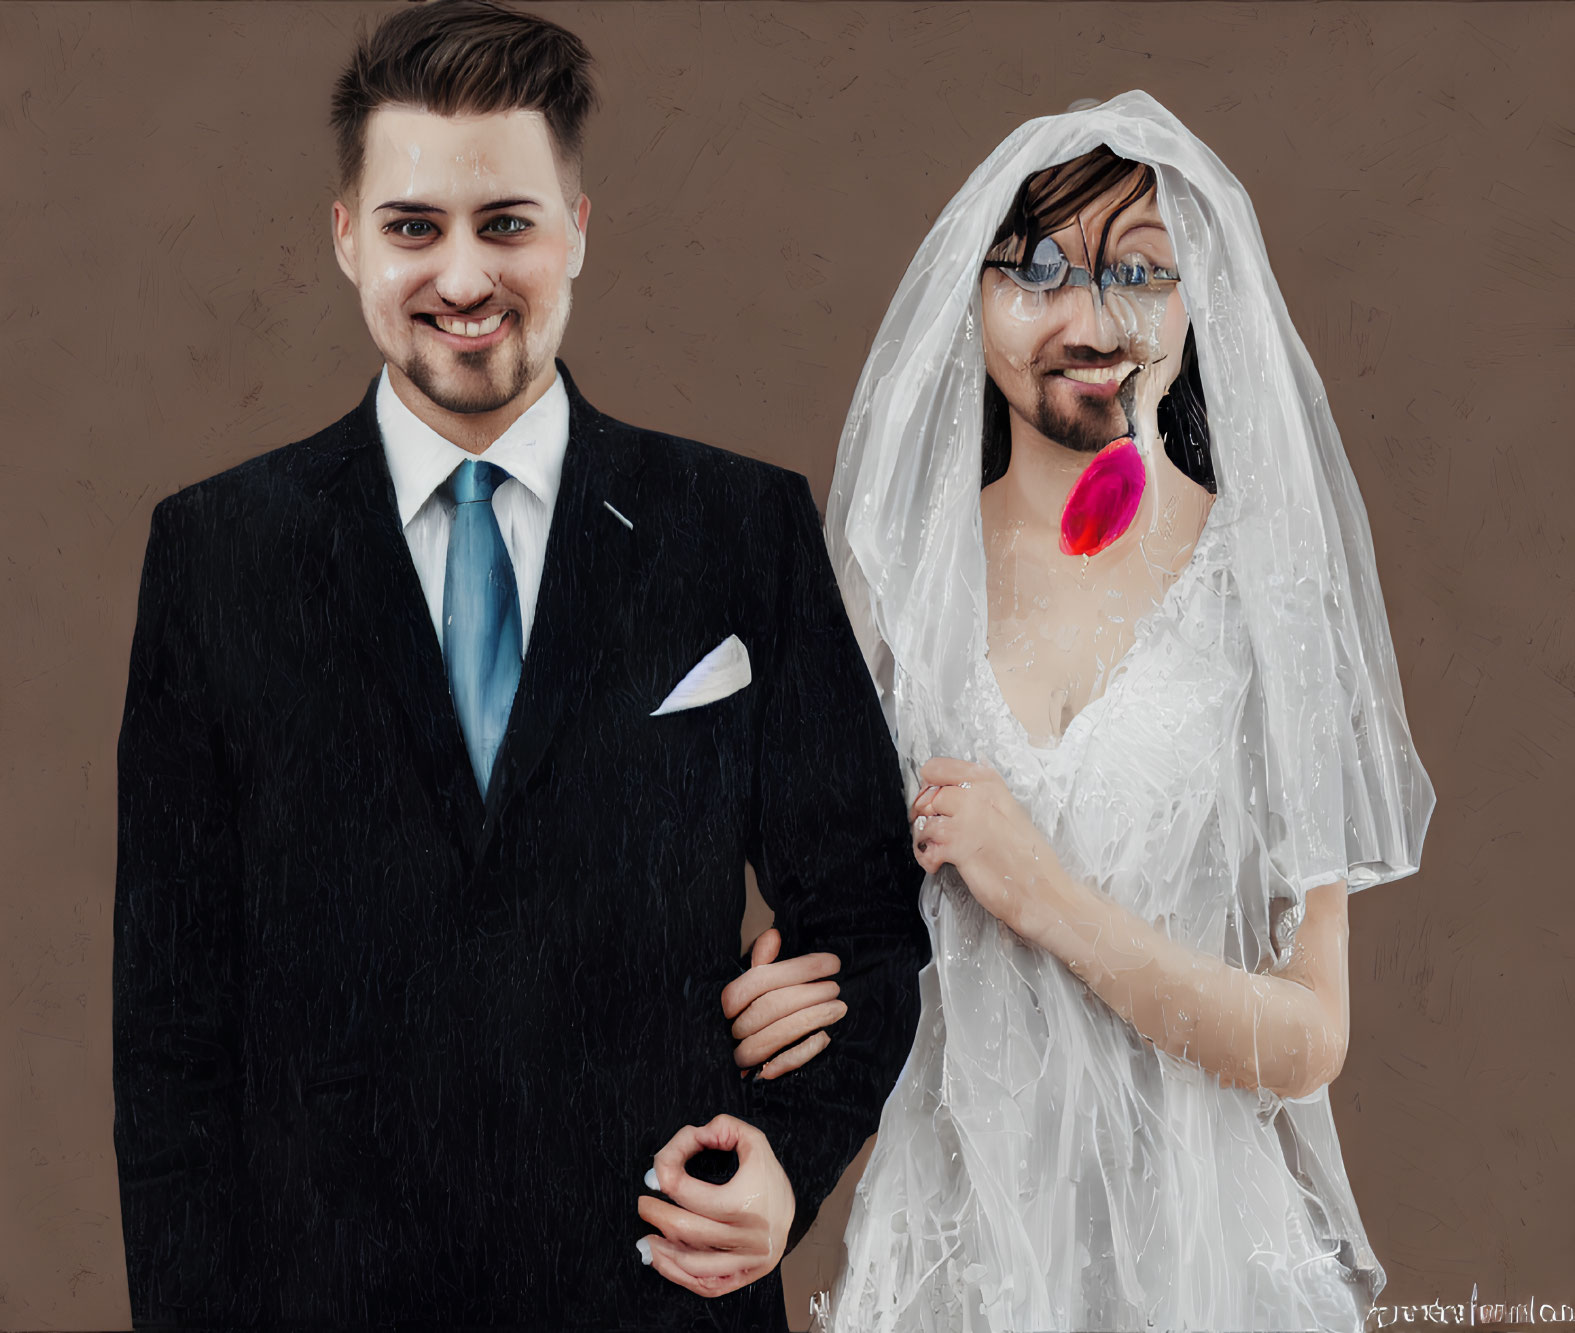 Digital Artwork: Two Individuals in Black Suit and White Bridal Gown